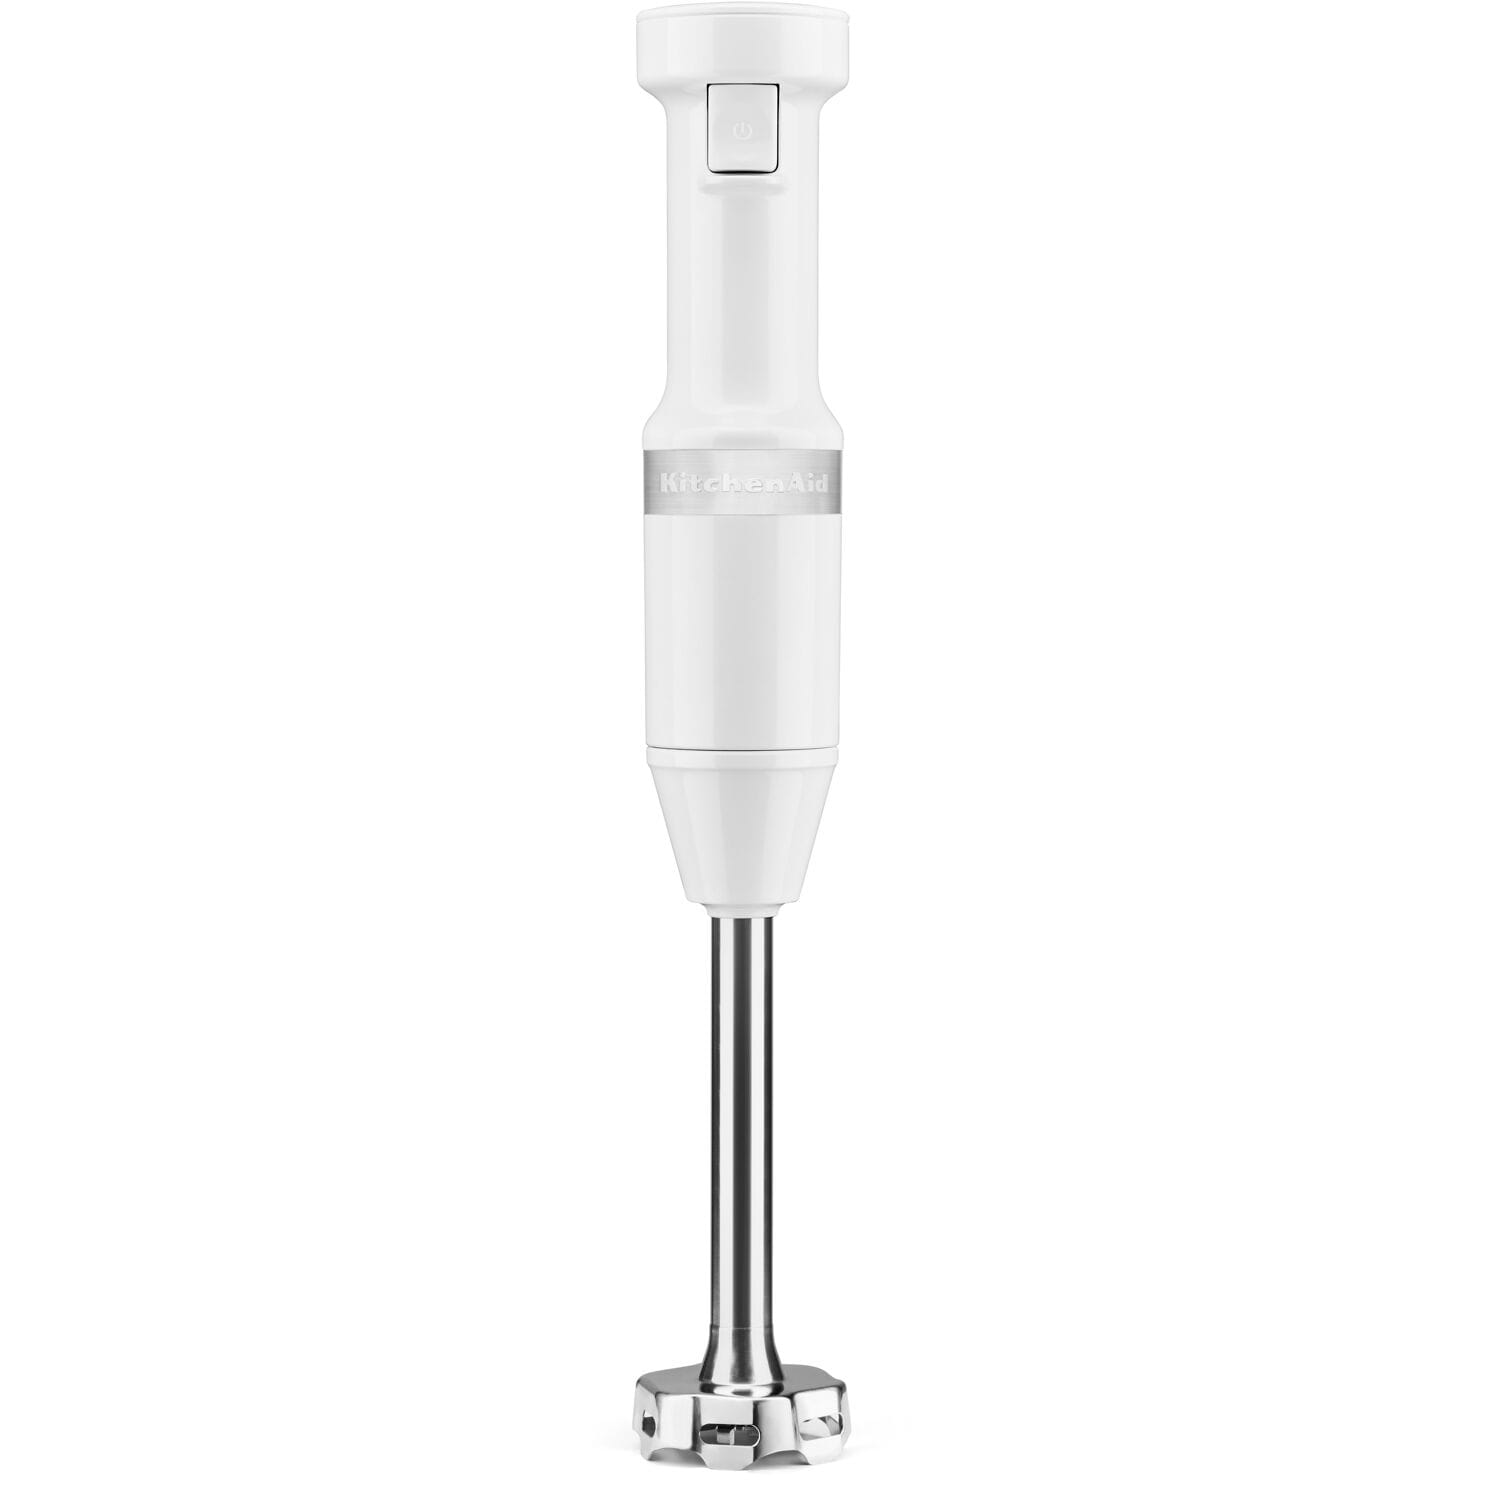 https://ak1.ostkcdn.com/images/products/is/images/direct/1690b761823de4617bf11121adb30fe145188252/KitchenAid-Corded-Variable-Speed-Immersion-Blender-in-White-with-Blending-Jar.jpg